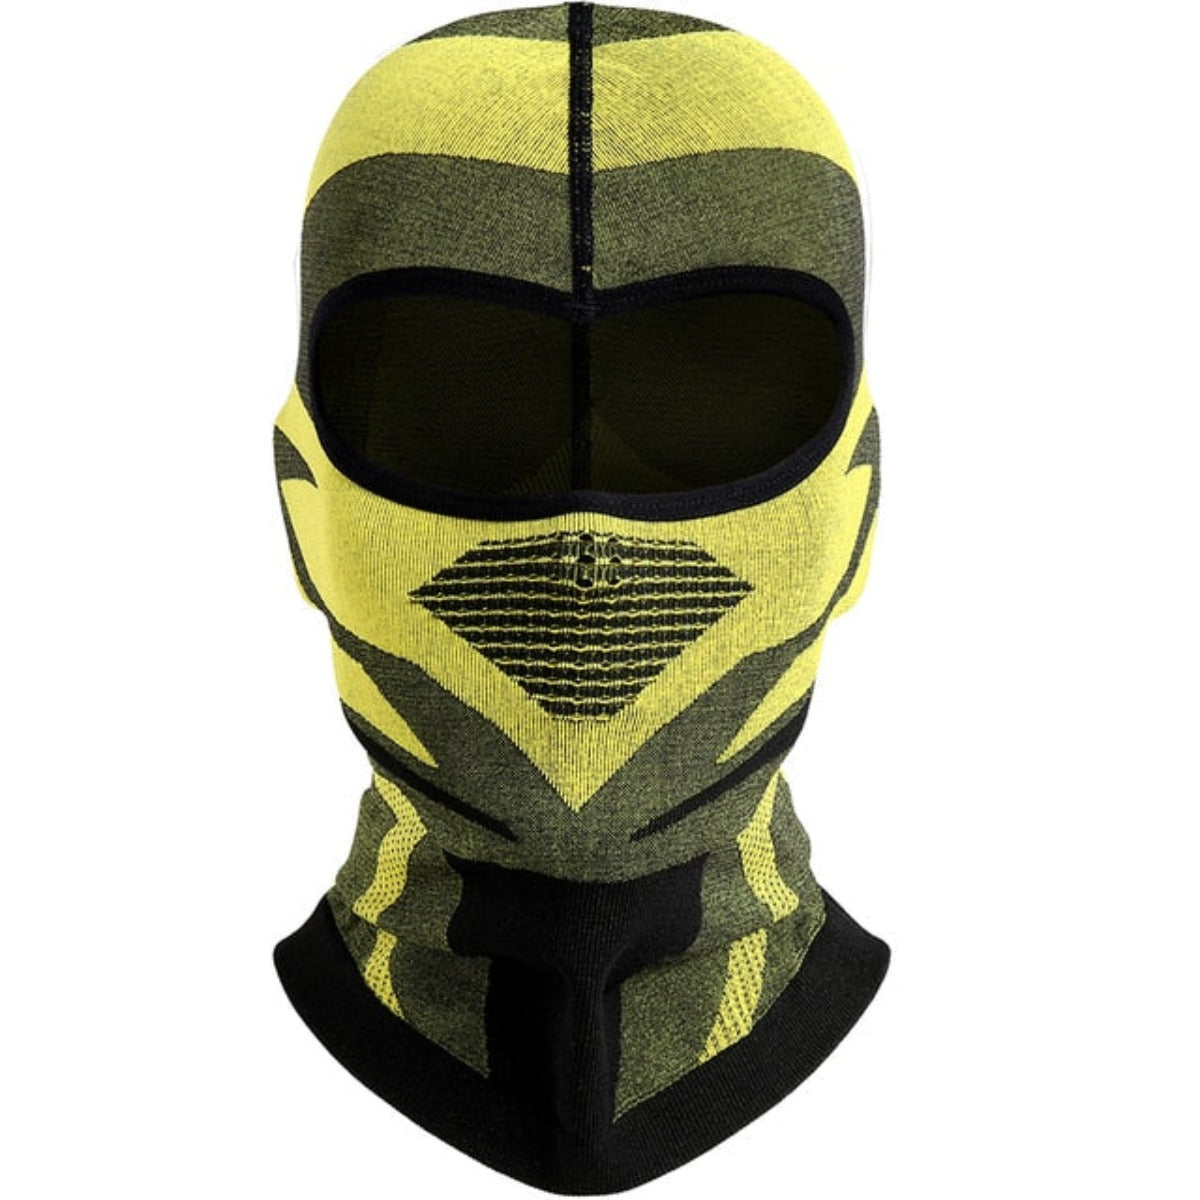 A Breathable Motorcycle Full Face Cover in yellow and black, designed to be windproof.